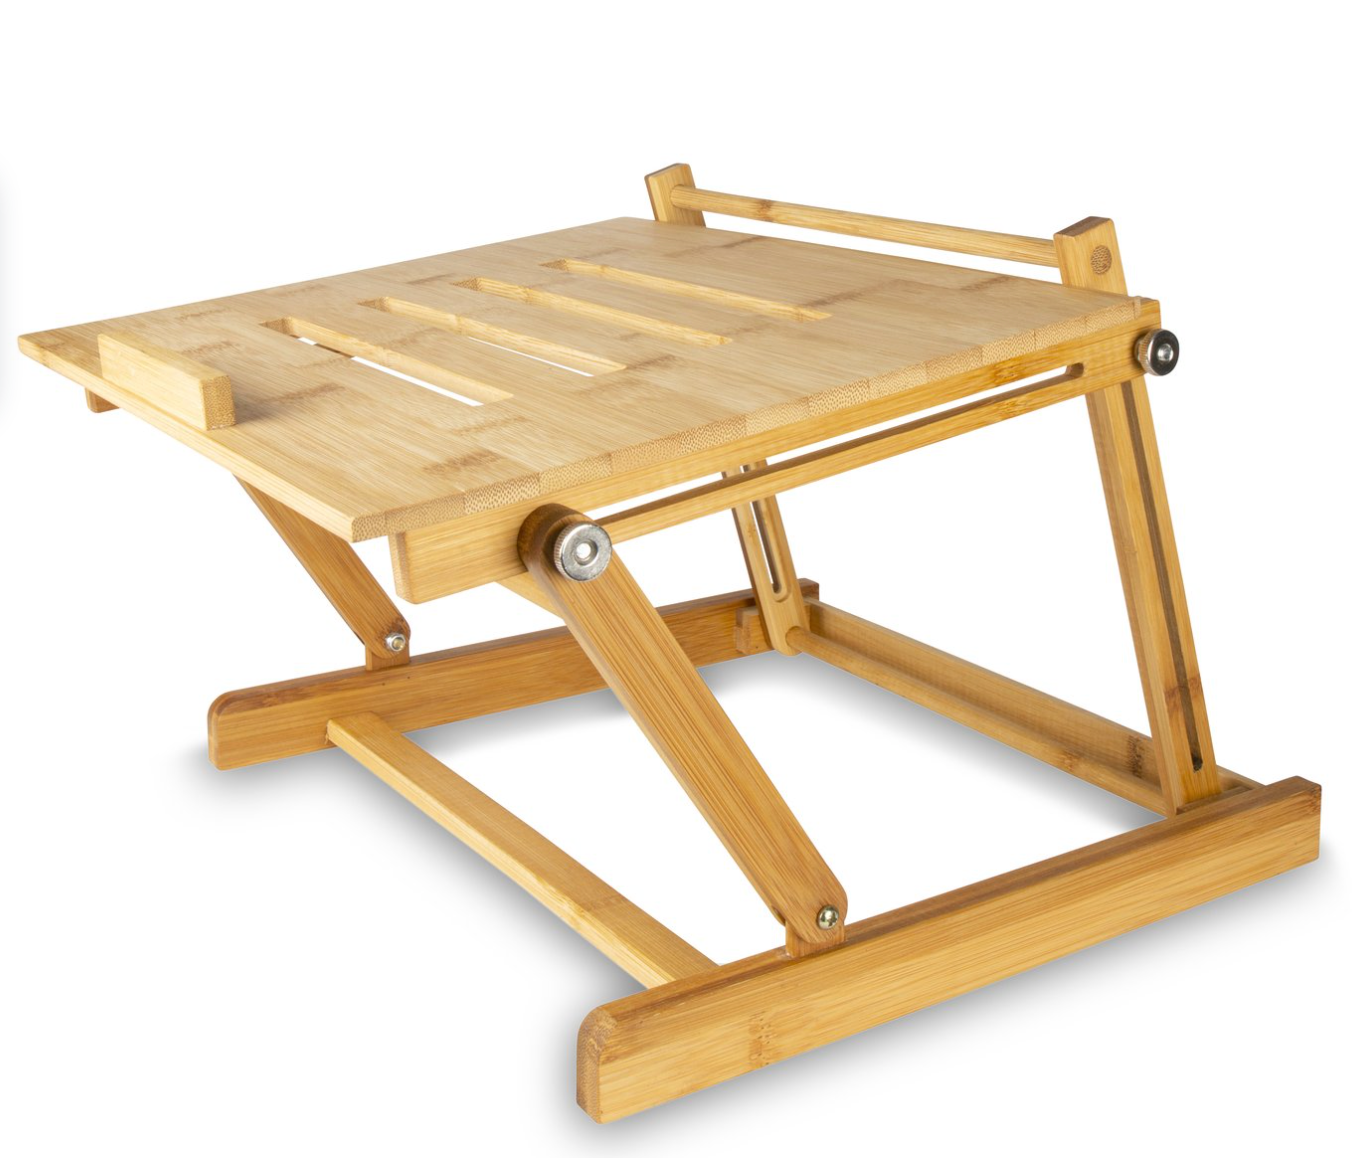 Bamboo Laptop Stand